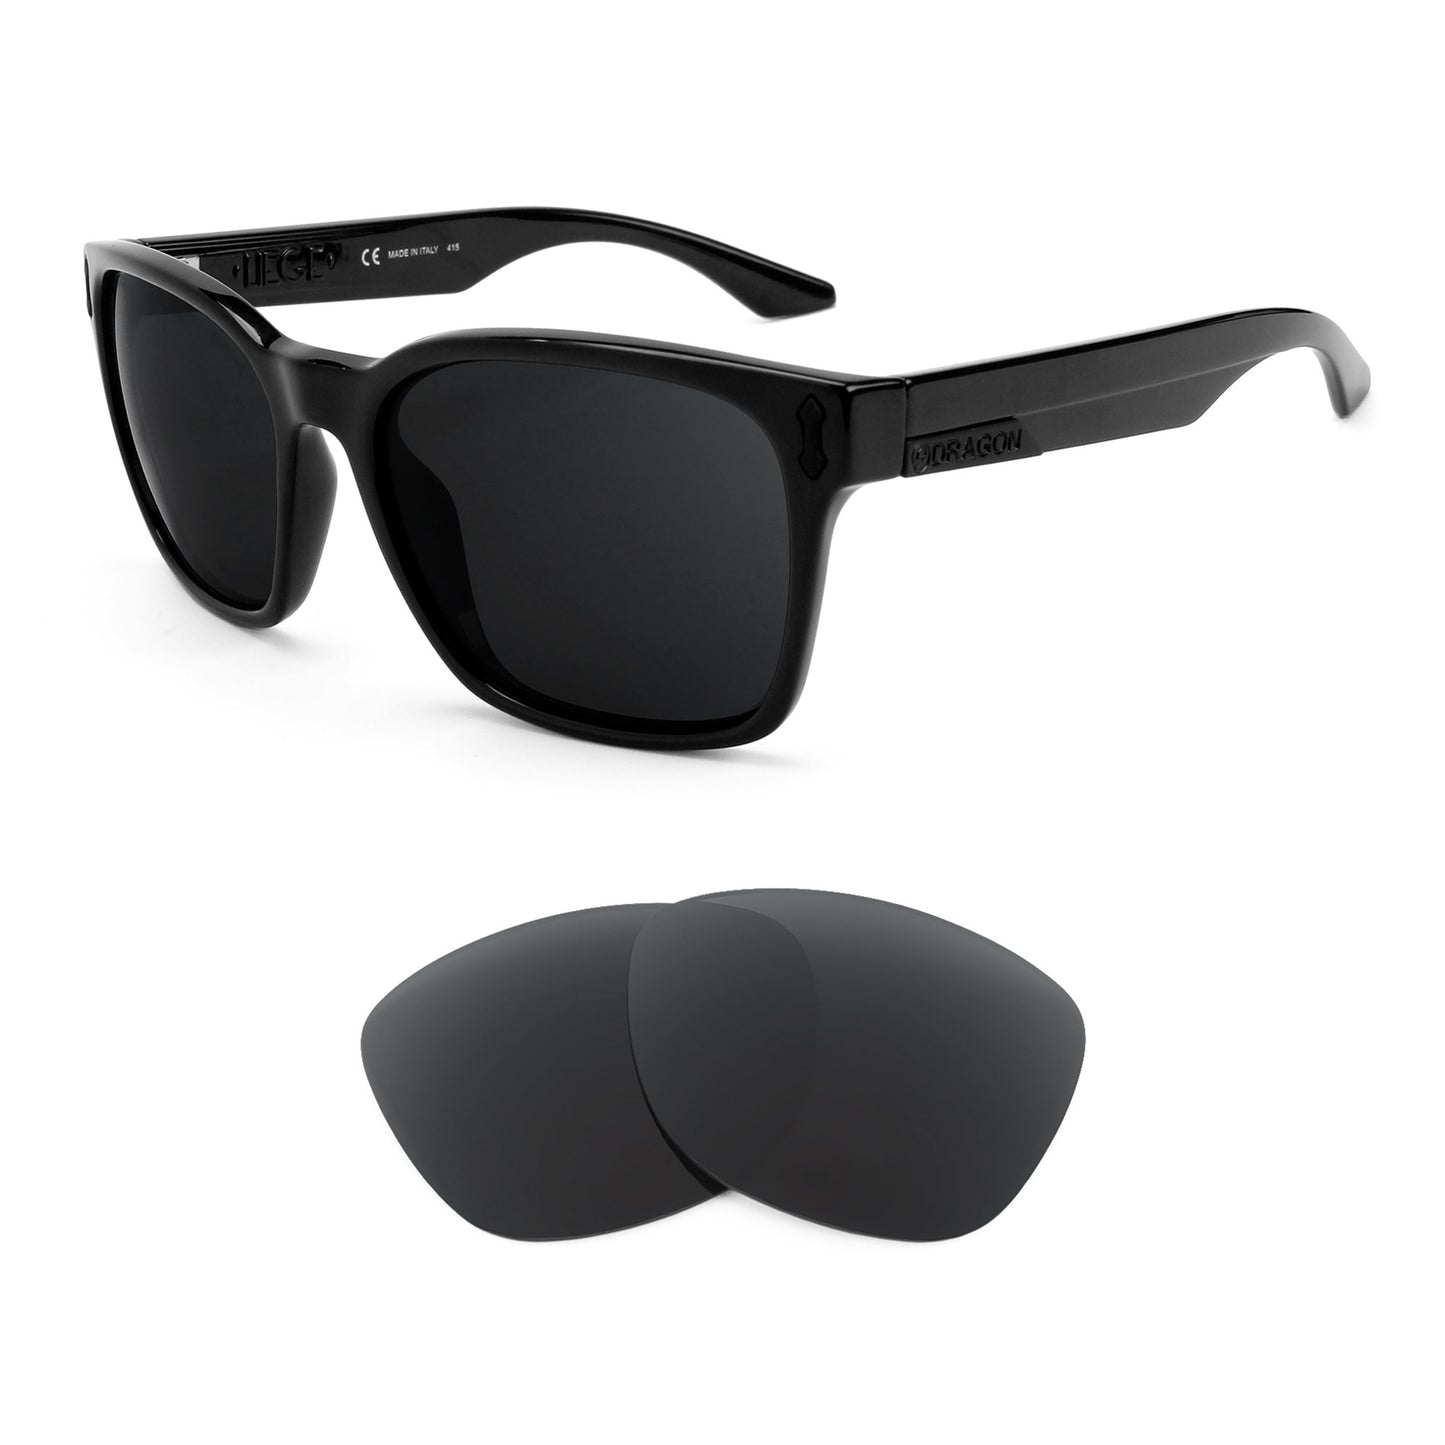 Dragon Liege sunglasses with replacement lenses